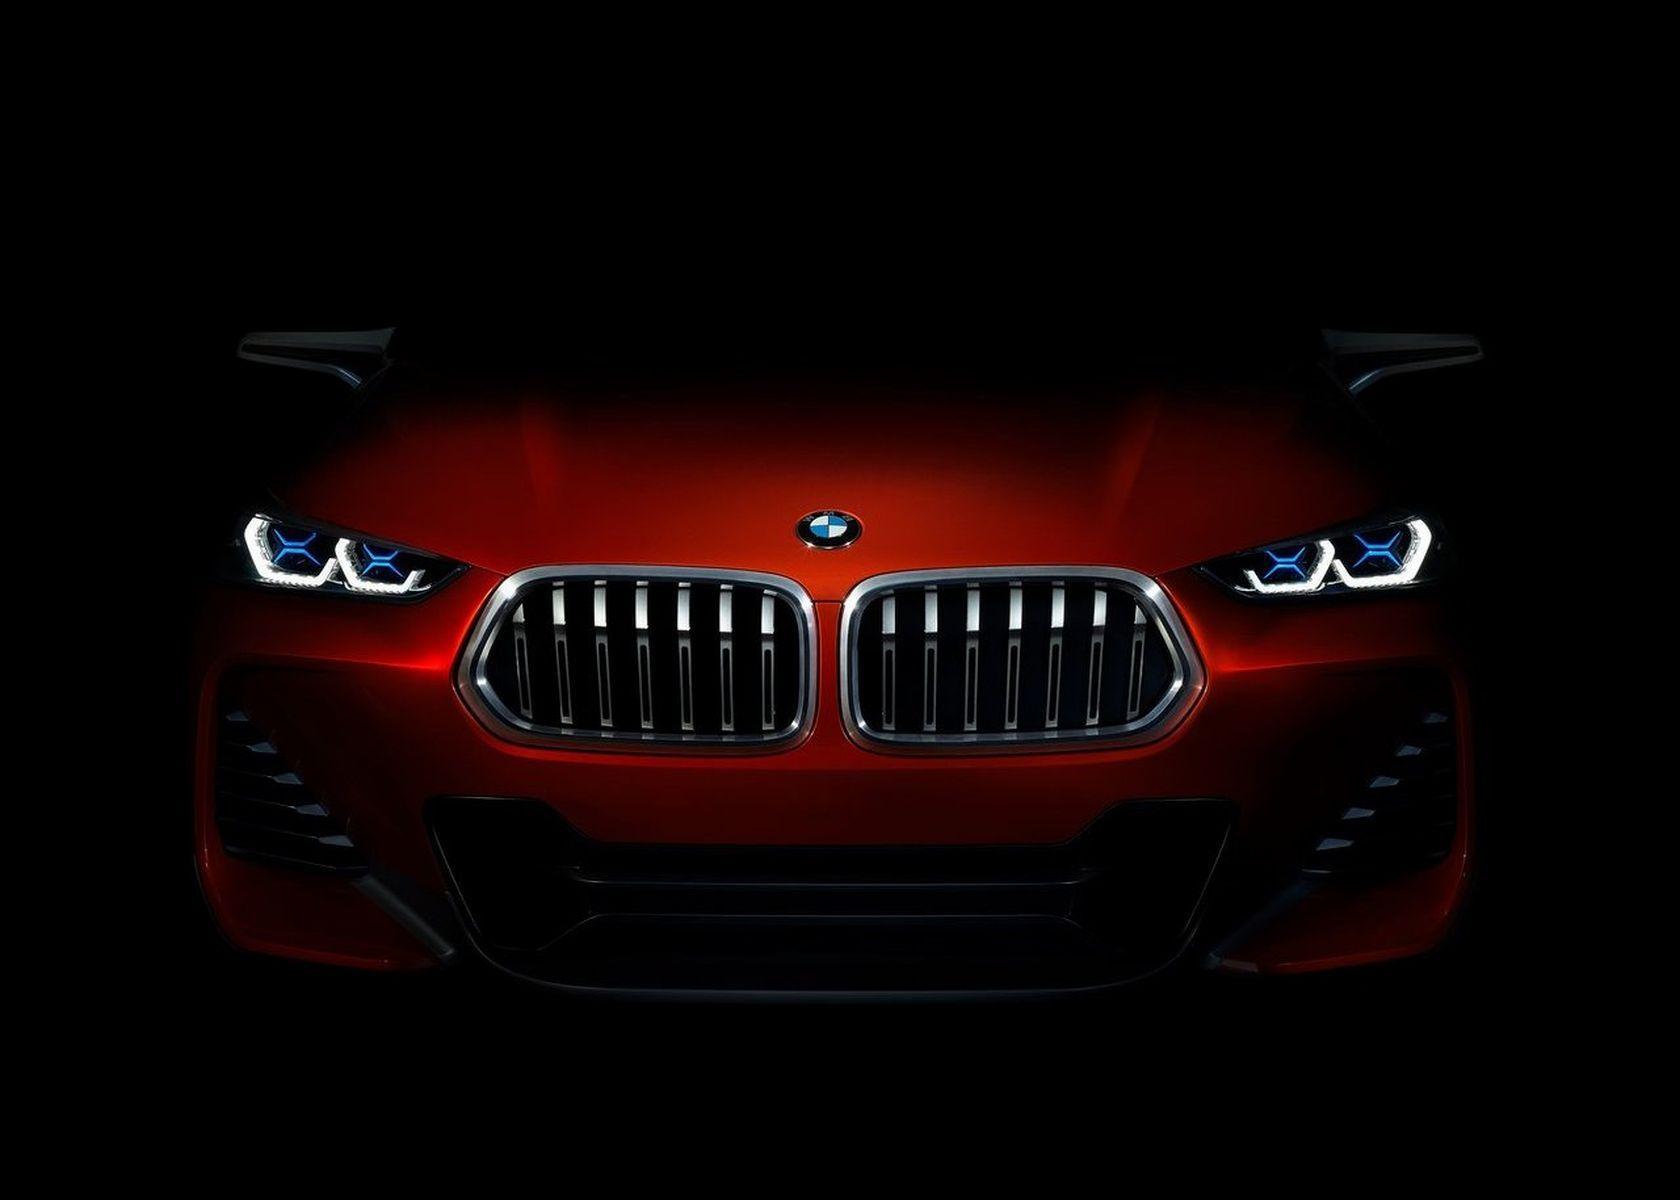 BMW X2 Wallpaper 4K Resolutions Auto Review